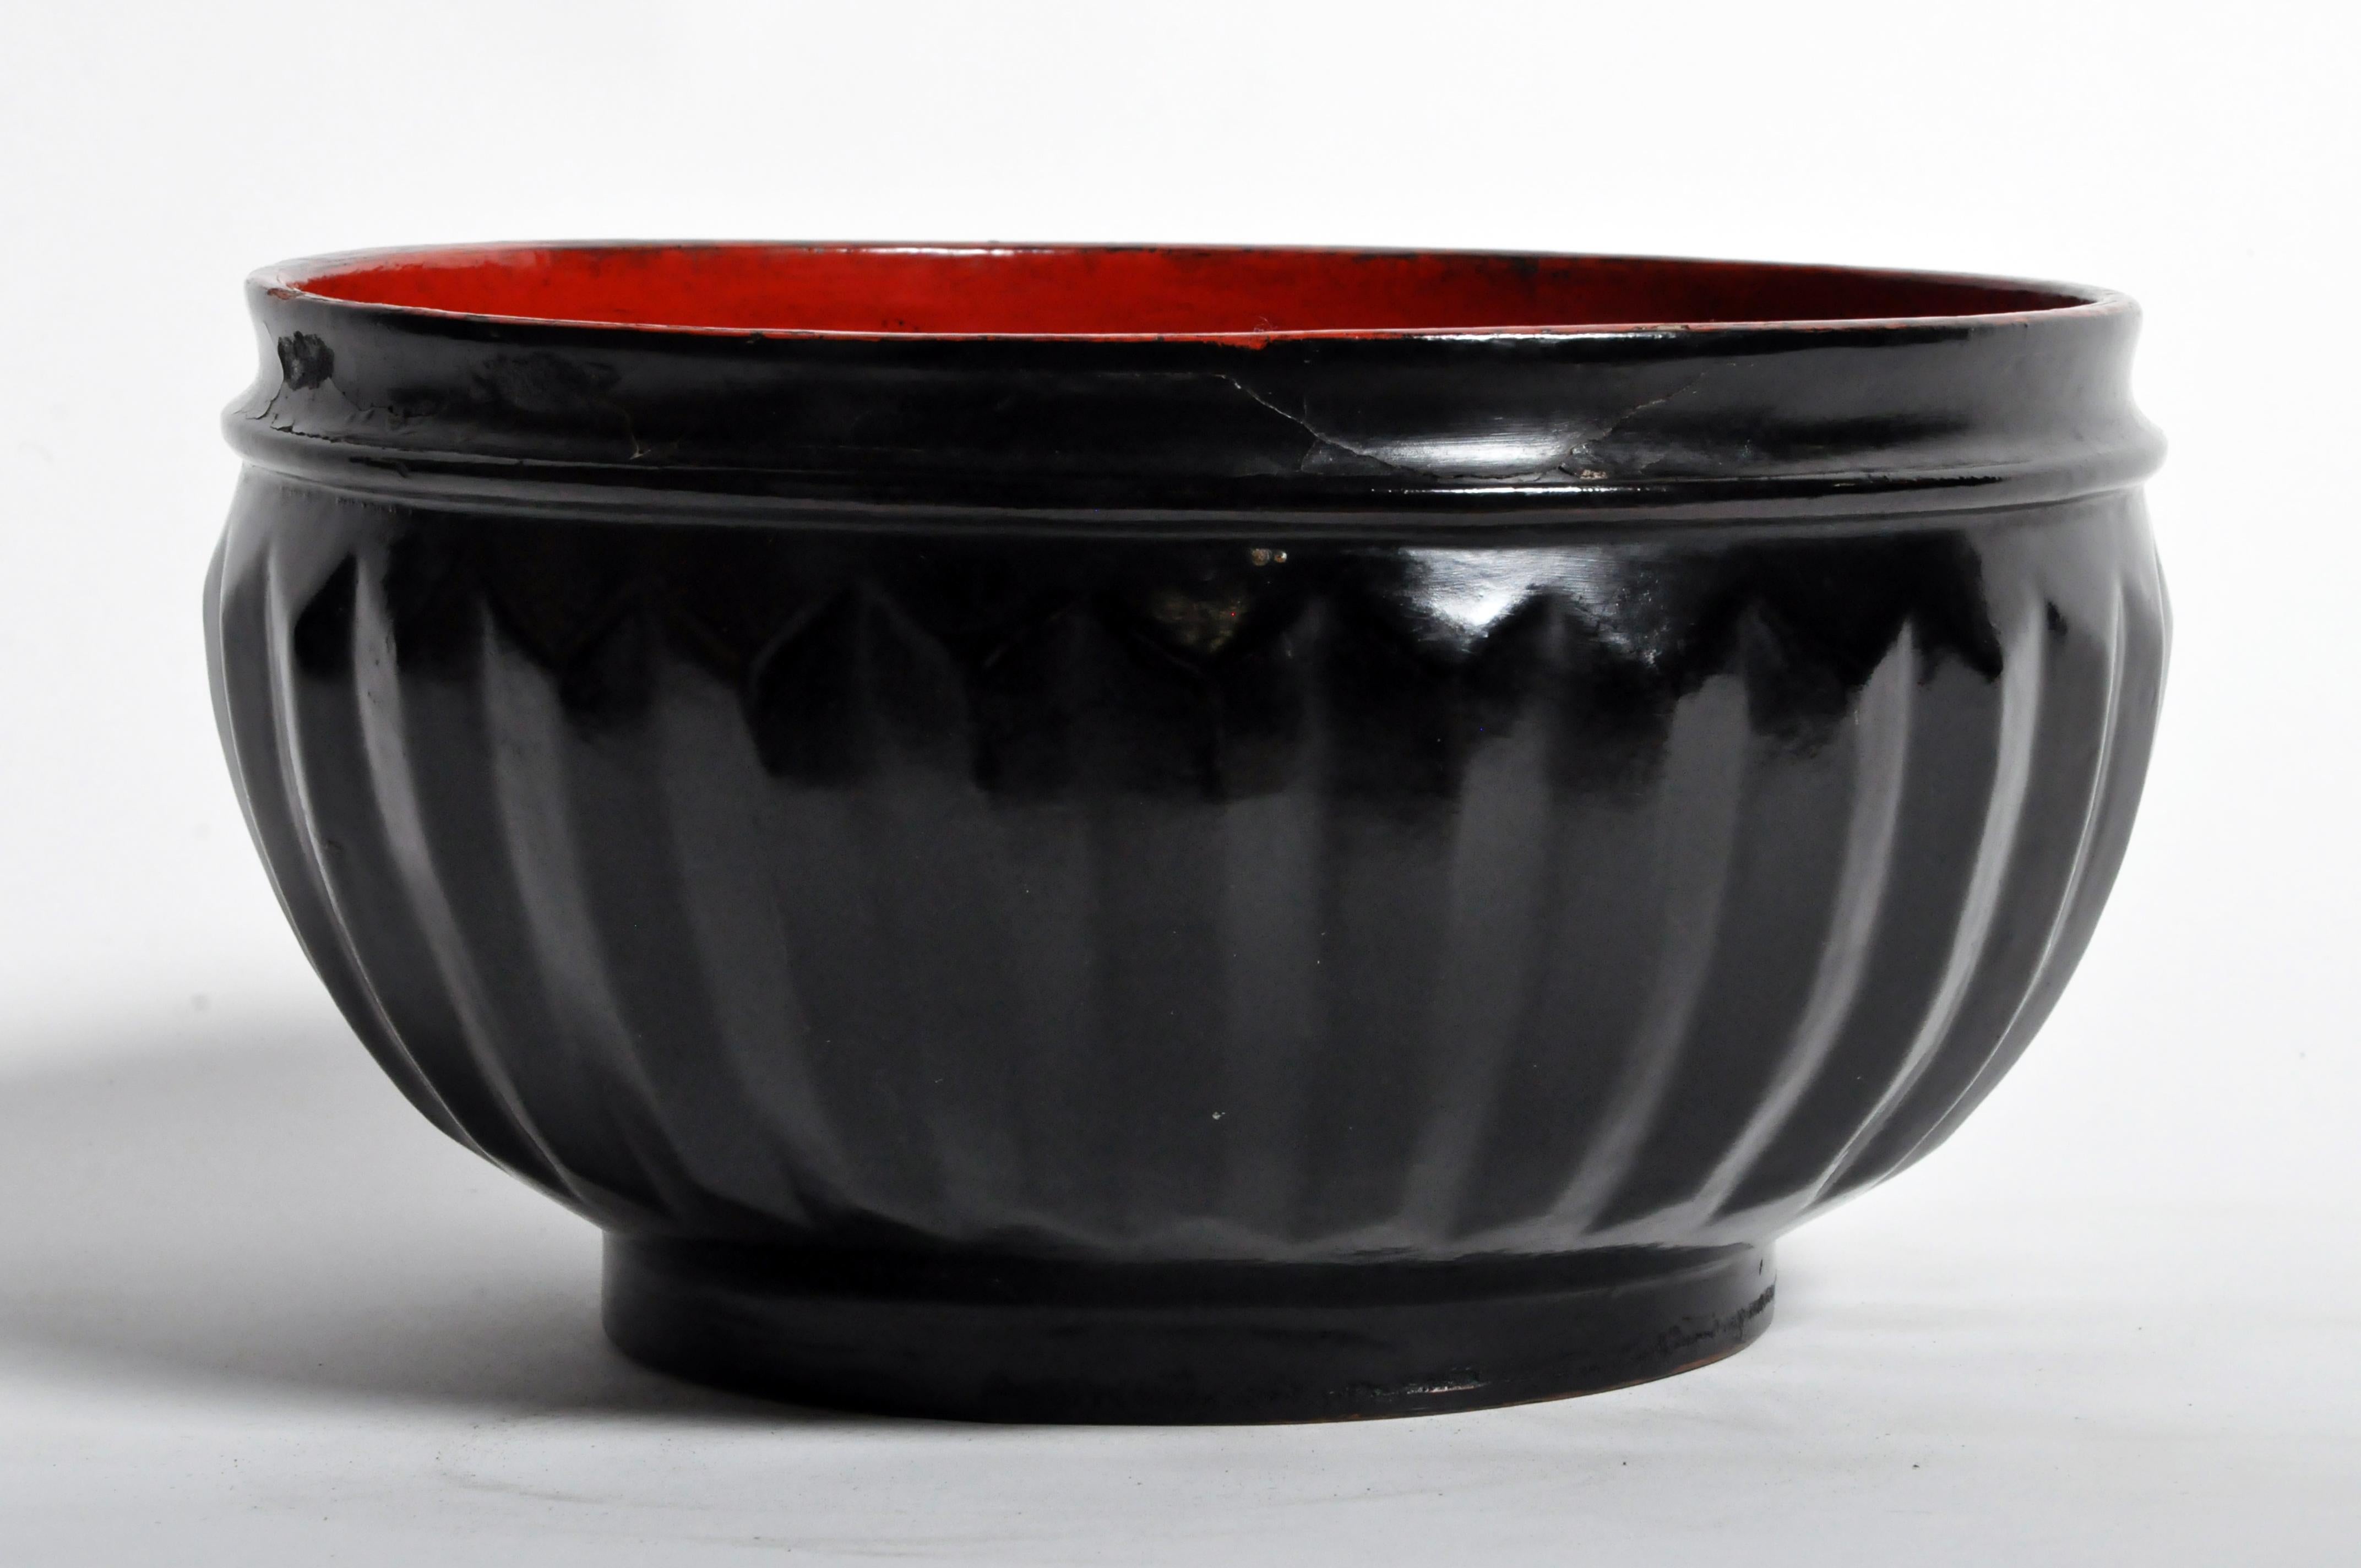 Thailand and Burma are both famous for sturdy and beautiful vessels, platters, and boxes made from lacquered wood and bamboo. Sap from the Laq tree was mixed with iron filings to produce black lacquer and with cinnabar powder to produce red lacquer.